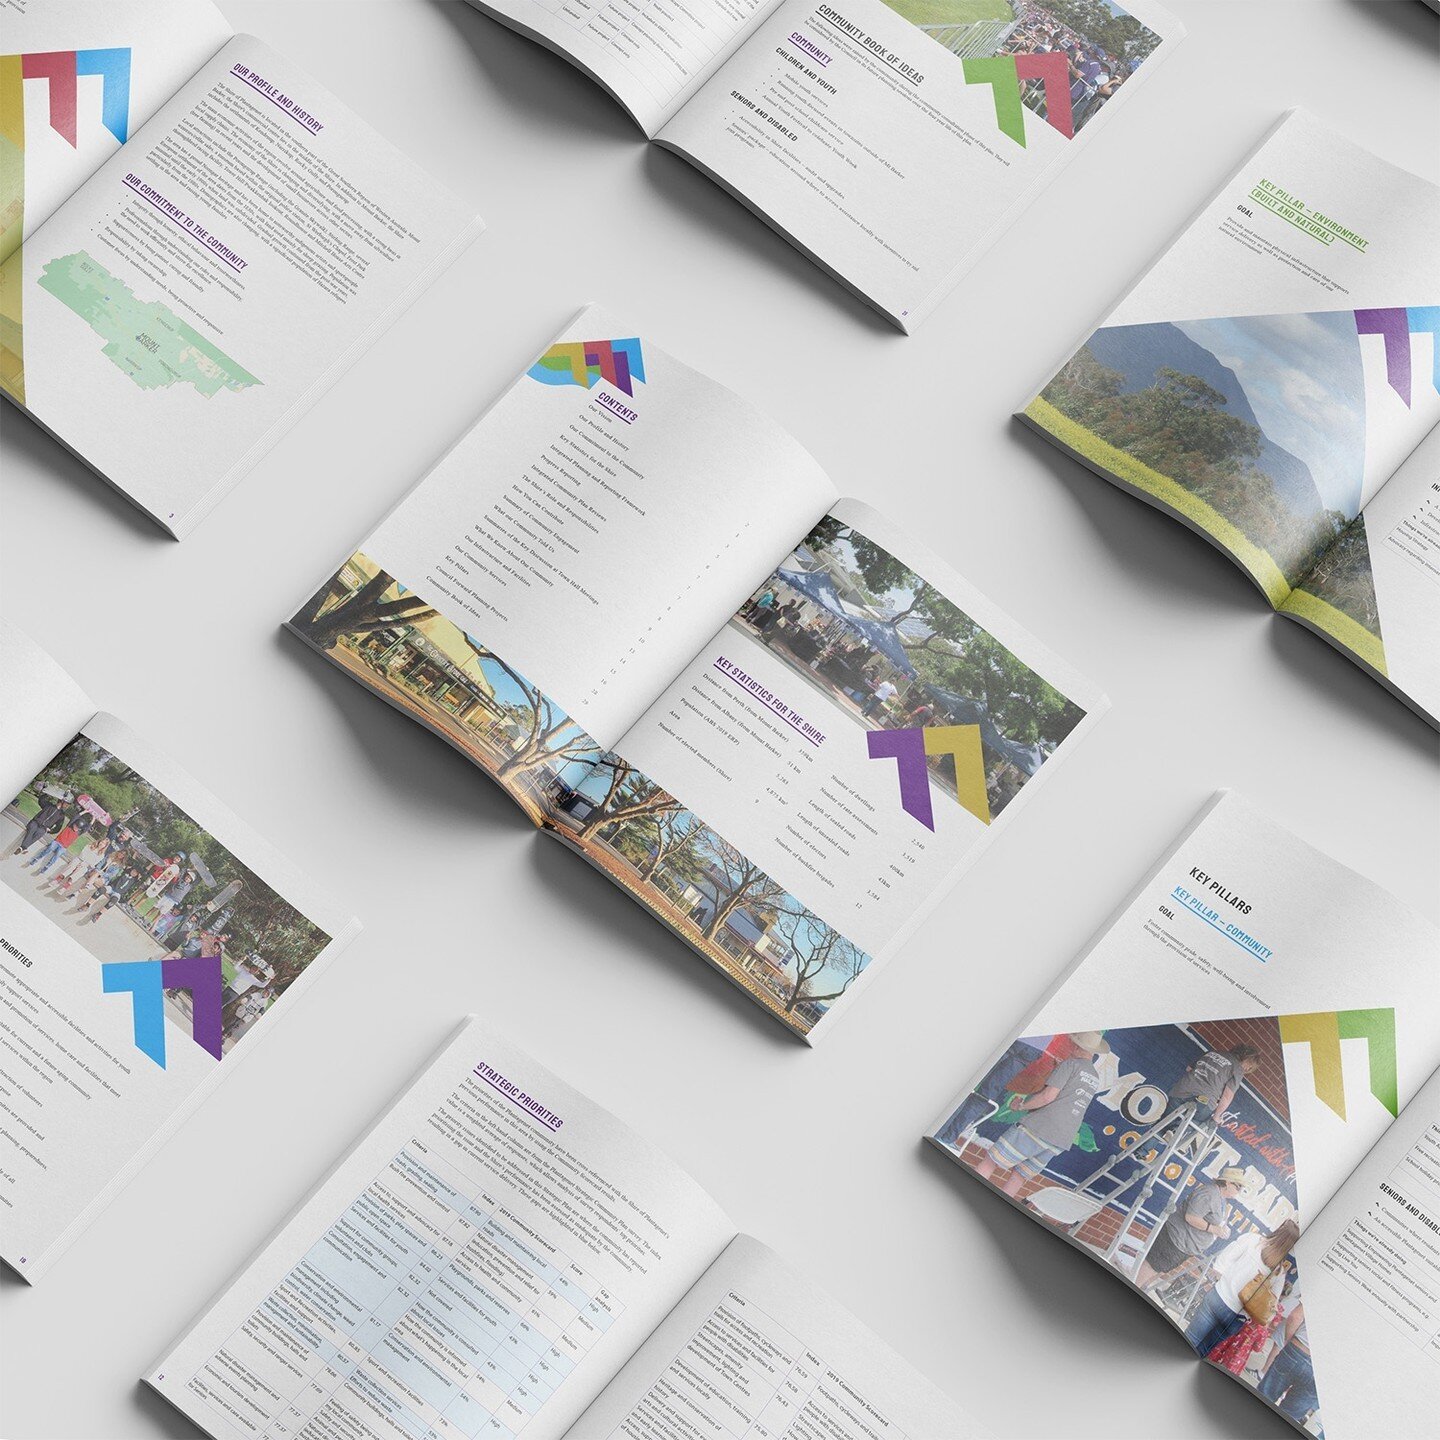 I had the absolute pleasure of designing the @shireofplantagenet 's Strategic Community Plan over the last few months and am loving seeing the reaction as it is released within the community.⁠
⁠
Titled &lsquo;Imagine Plantagenet&rsquo; the plan has b